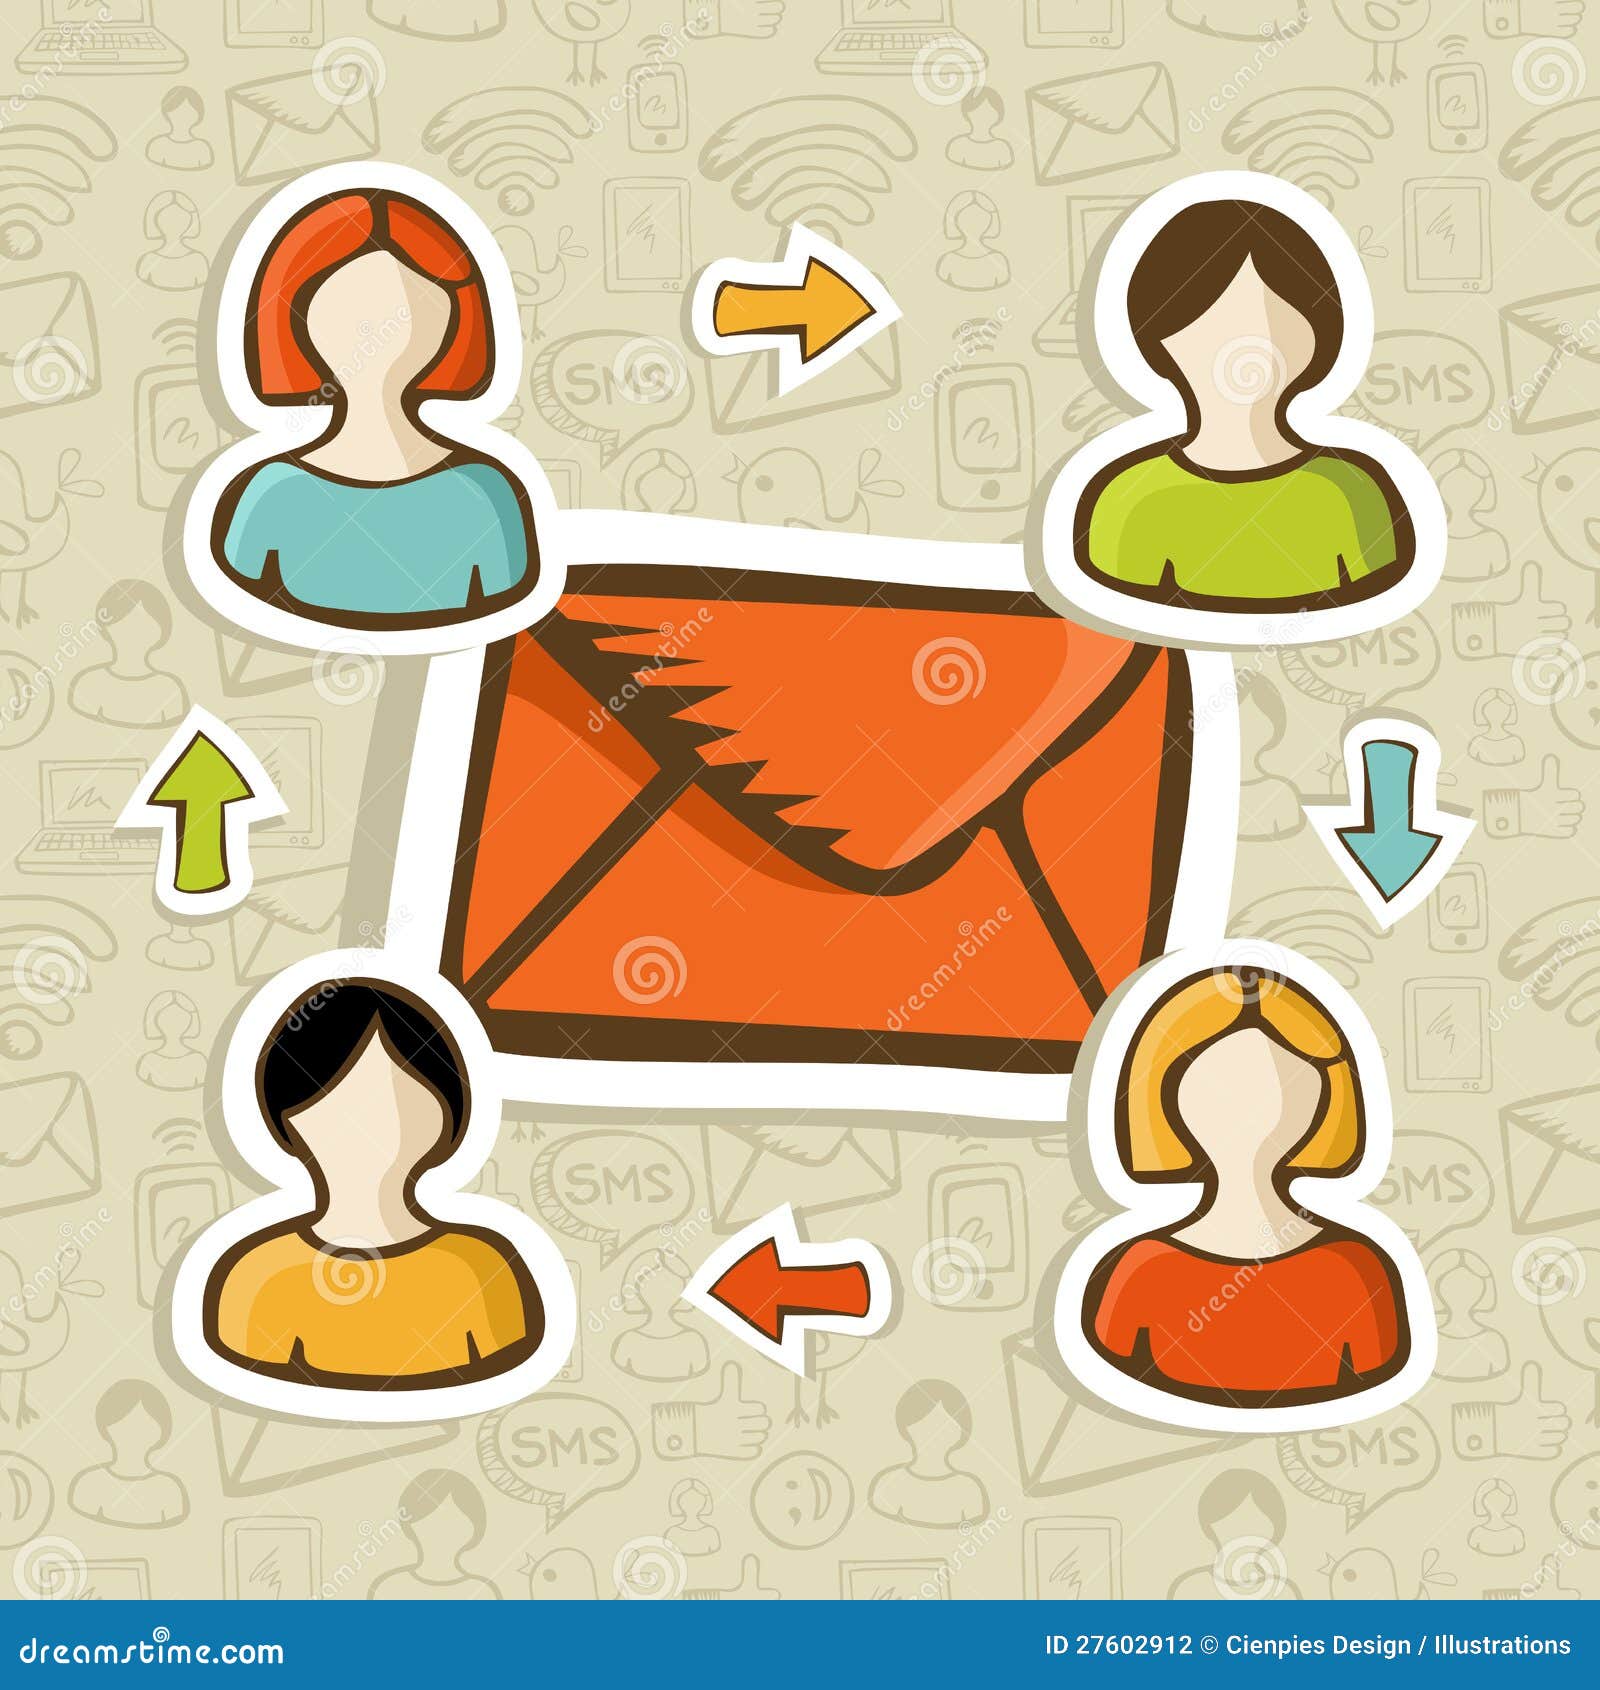 email marketing campaign concept background